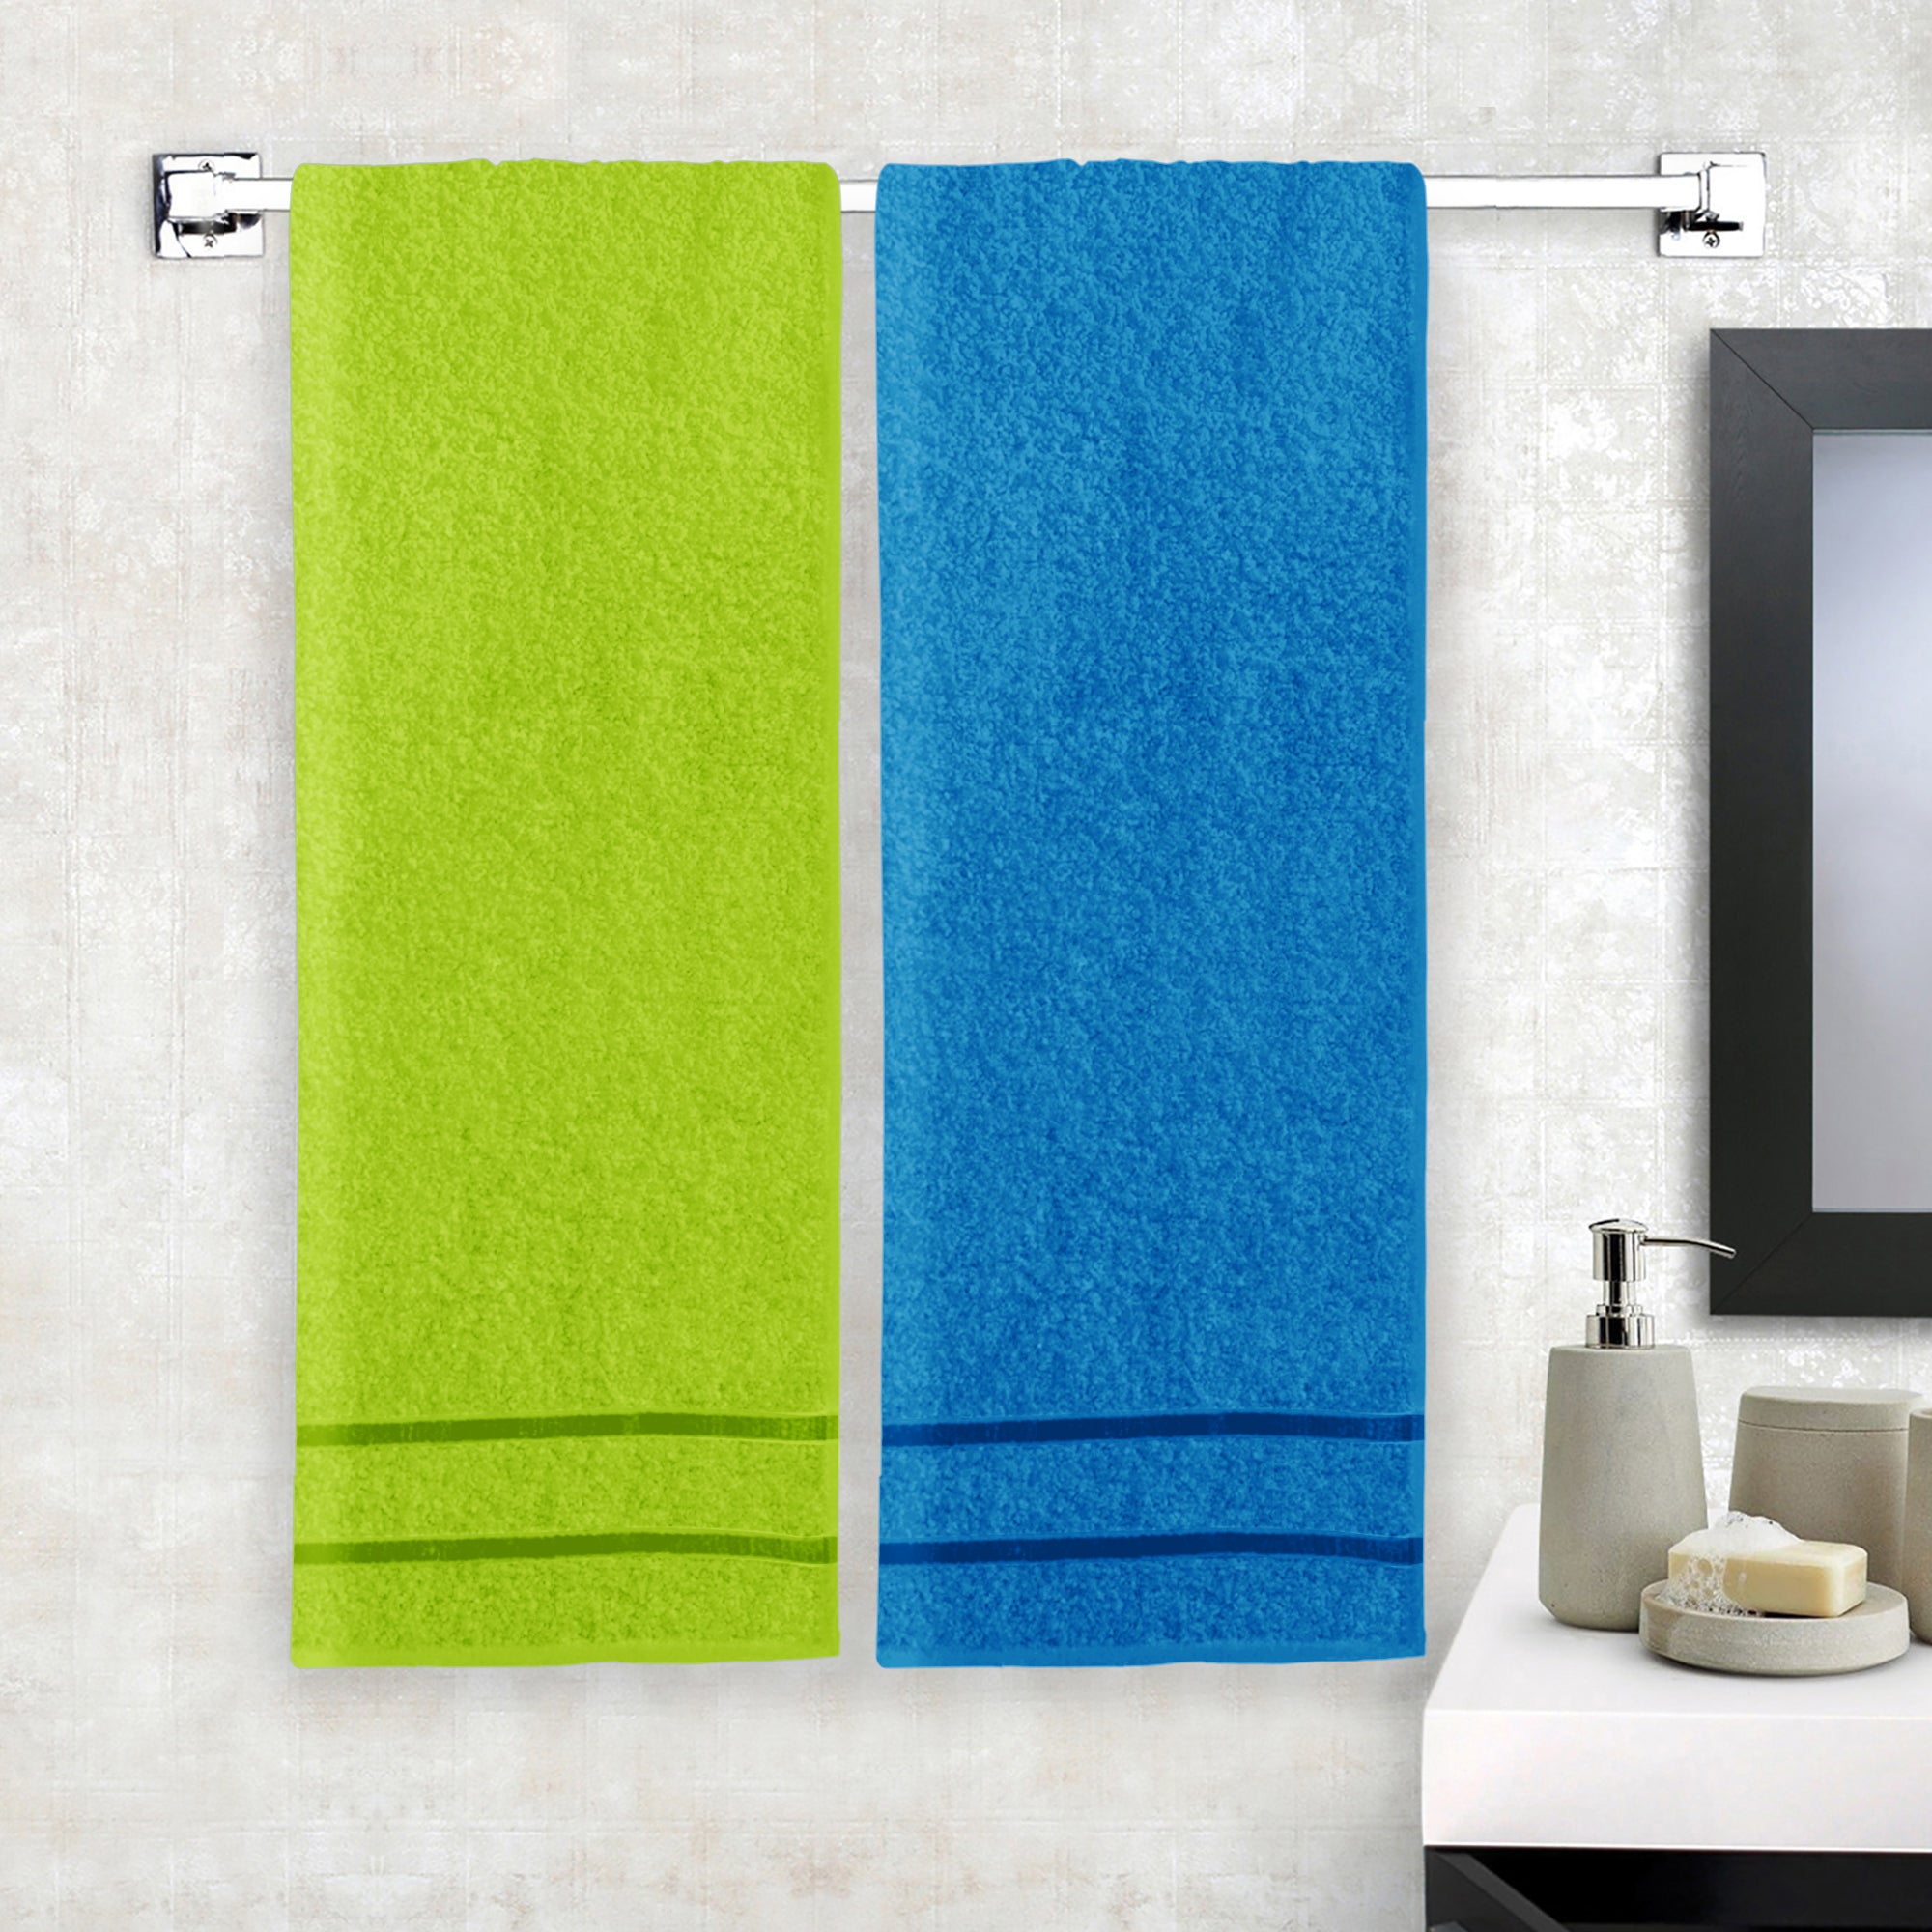 Story@Home 2 Units 100% Cotton Bath Towels - Green and Blue